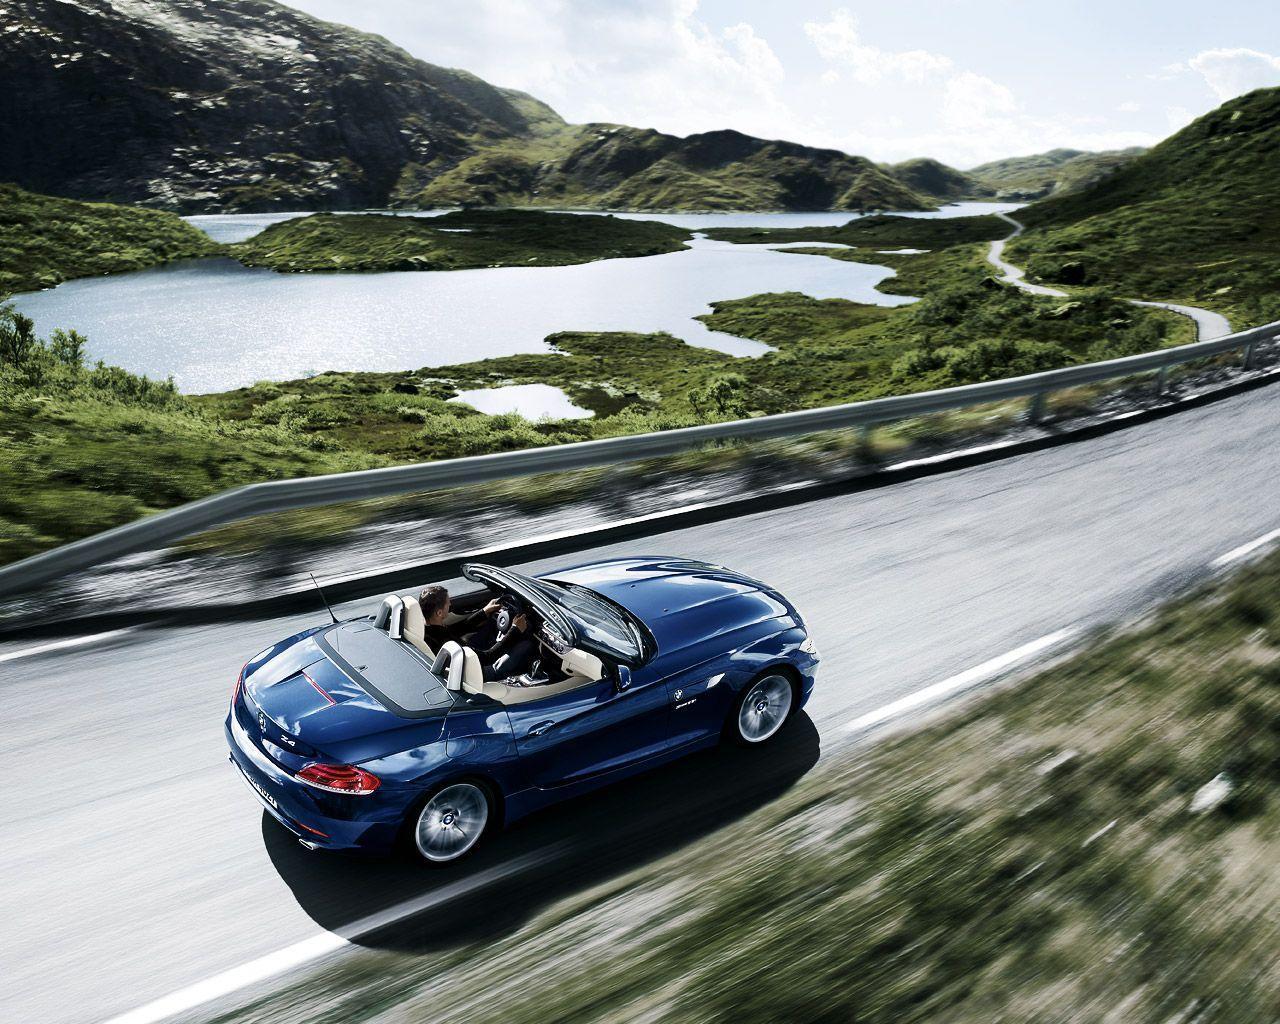 THE most amazing 2009 BMW Z4 wallpaper